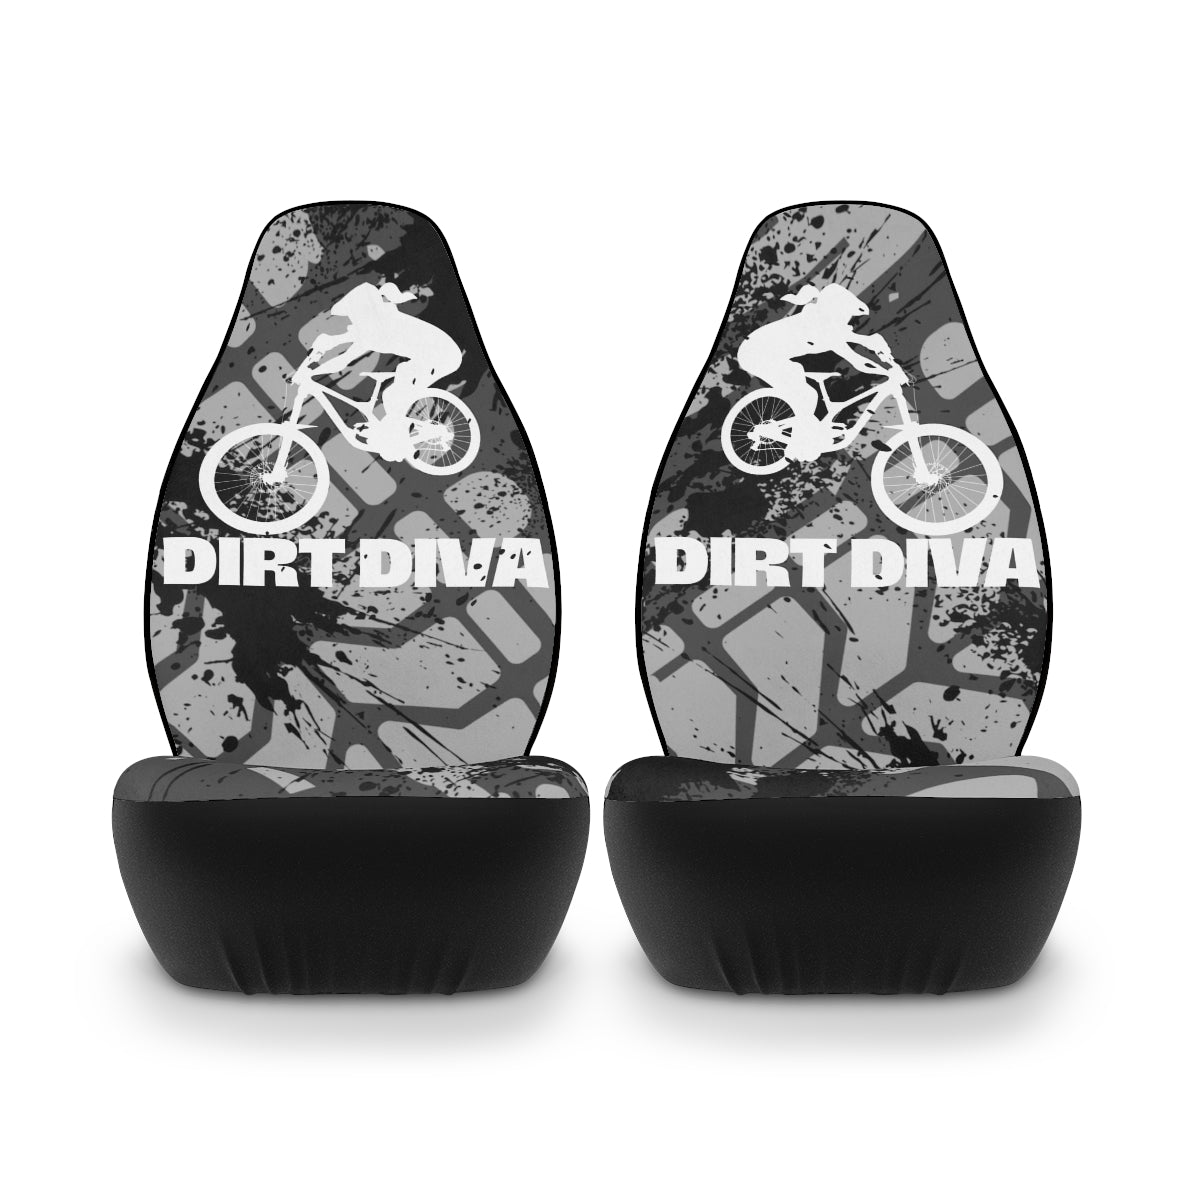 Dirt Diva - Car Seat Covers - Grey and Black - Set of Two - Car - Truck -SUV